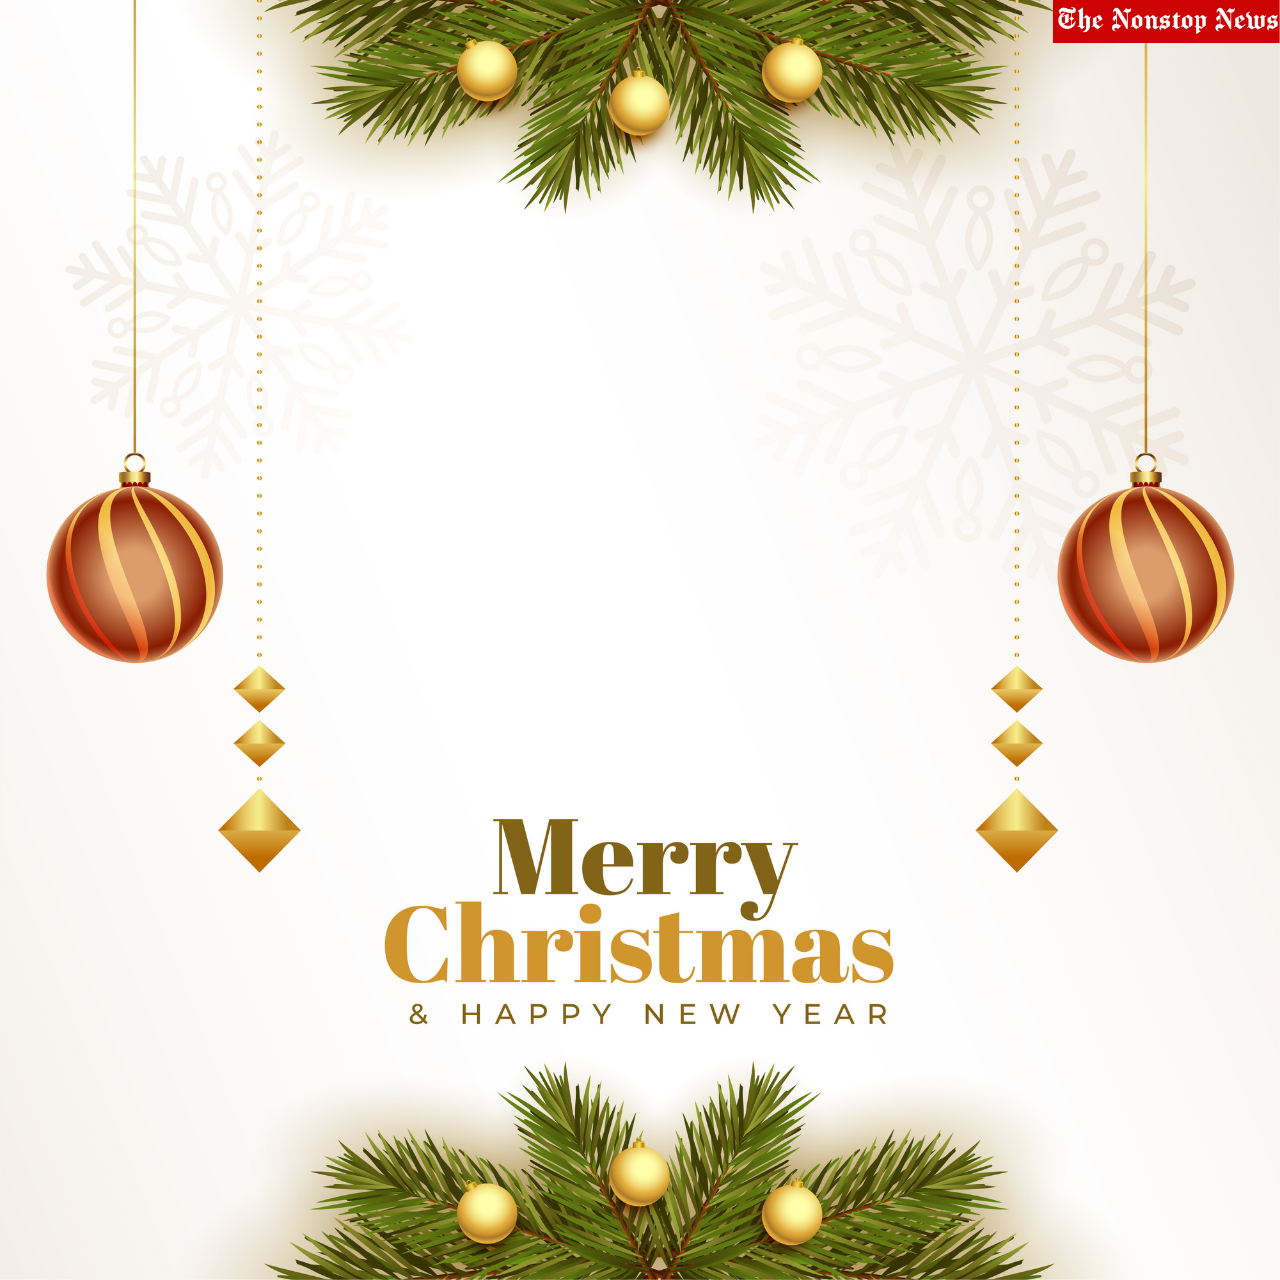 Merry Christmas 2021 Wishes, Greetings, Images, Messages, Quotes and Poster to greet Employees